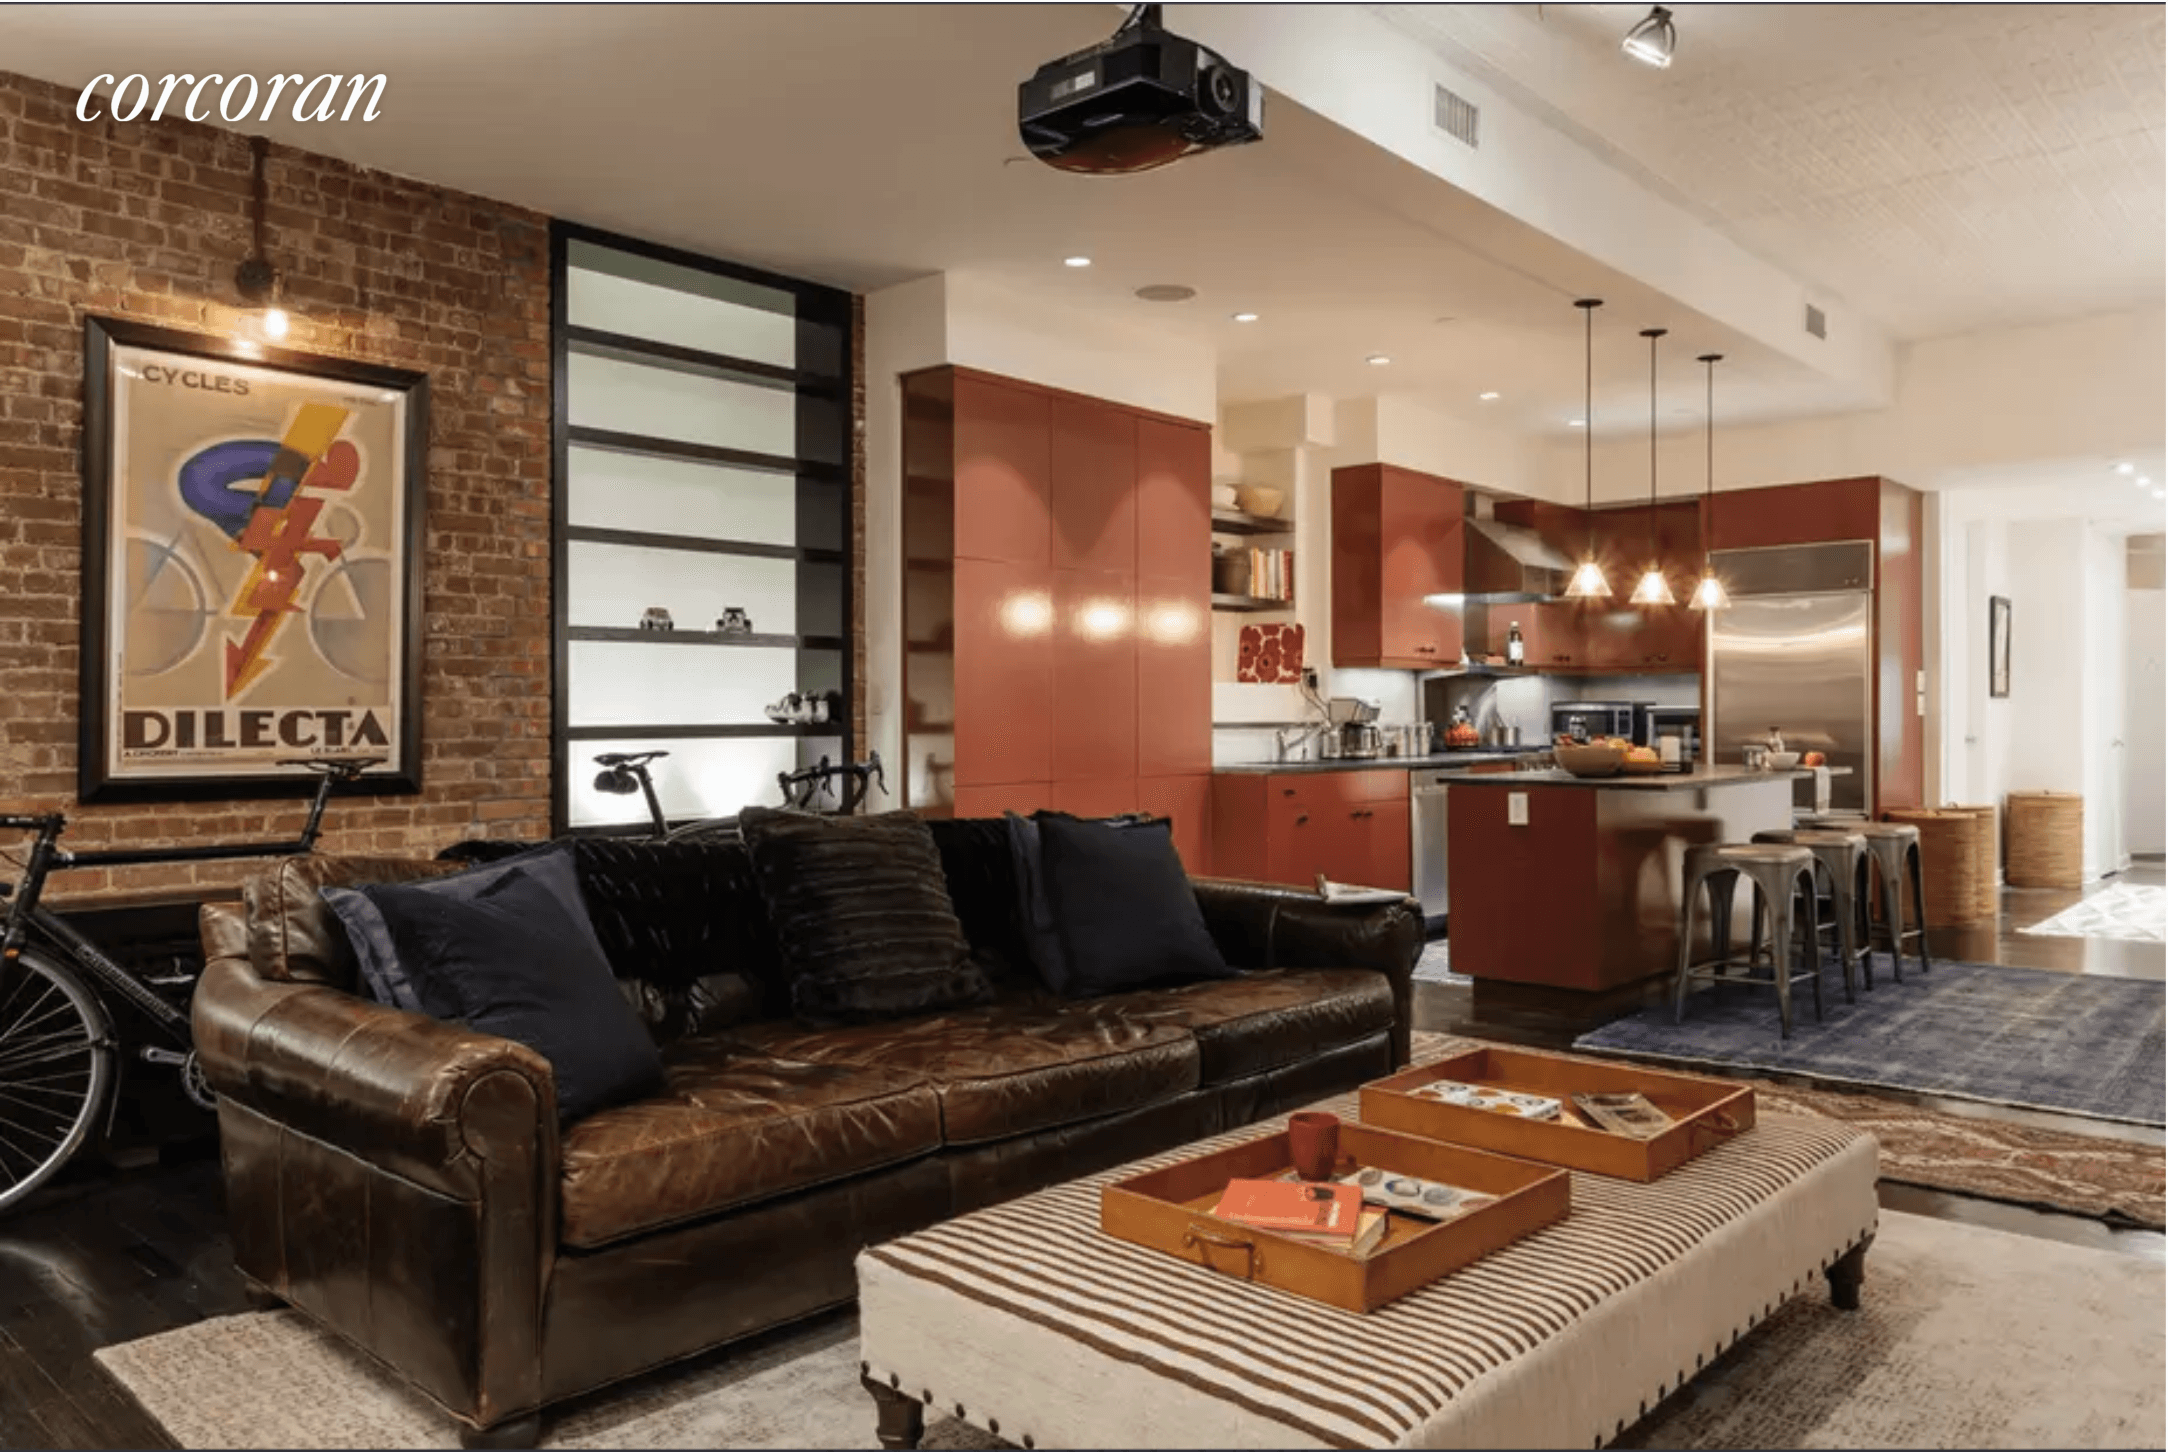 SOHO FULL FLOOR 3 Bed 2 Bath LOFT FURNISHED UNFURNISHED NO FEE VIDEO available upon request Rarely available in Prime Soho location, this pre war loft is a combination of ...